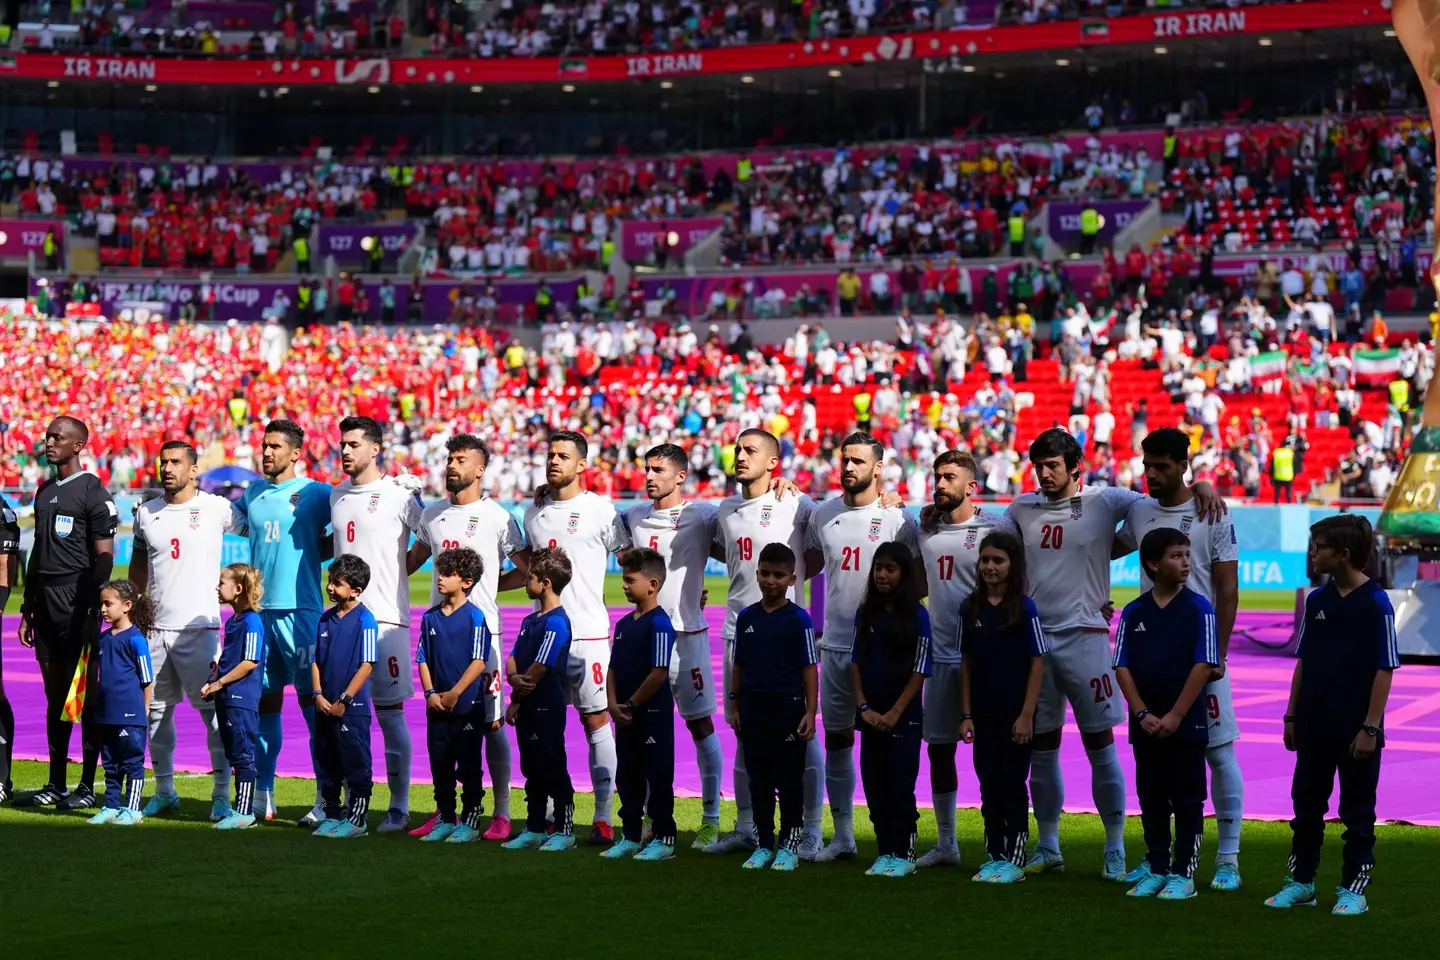 The Iranian players have had their families threatened if they don't toe the line during the World Cup.